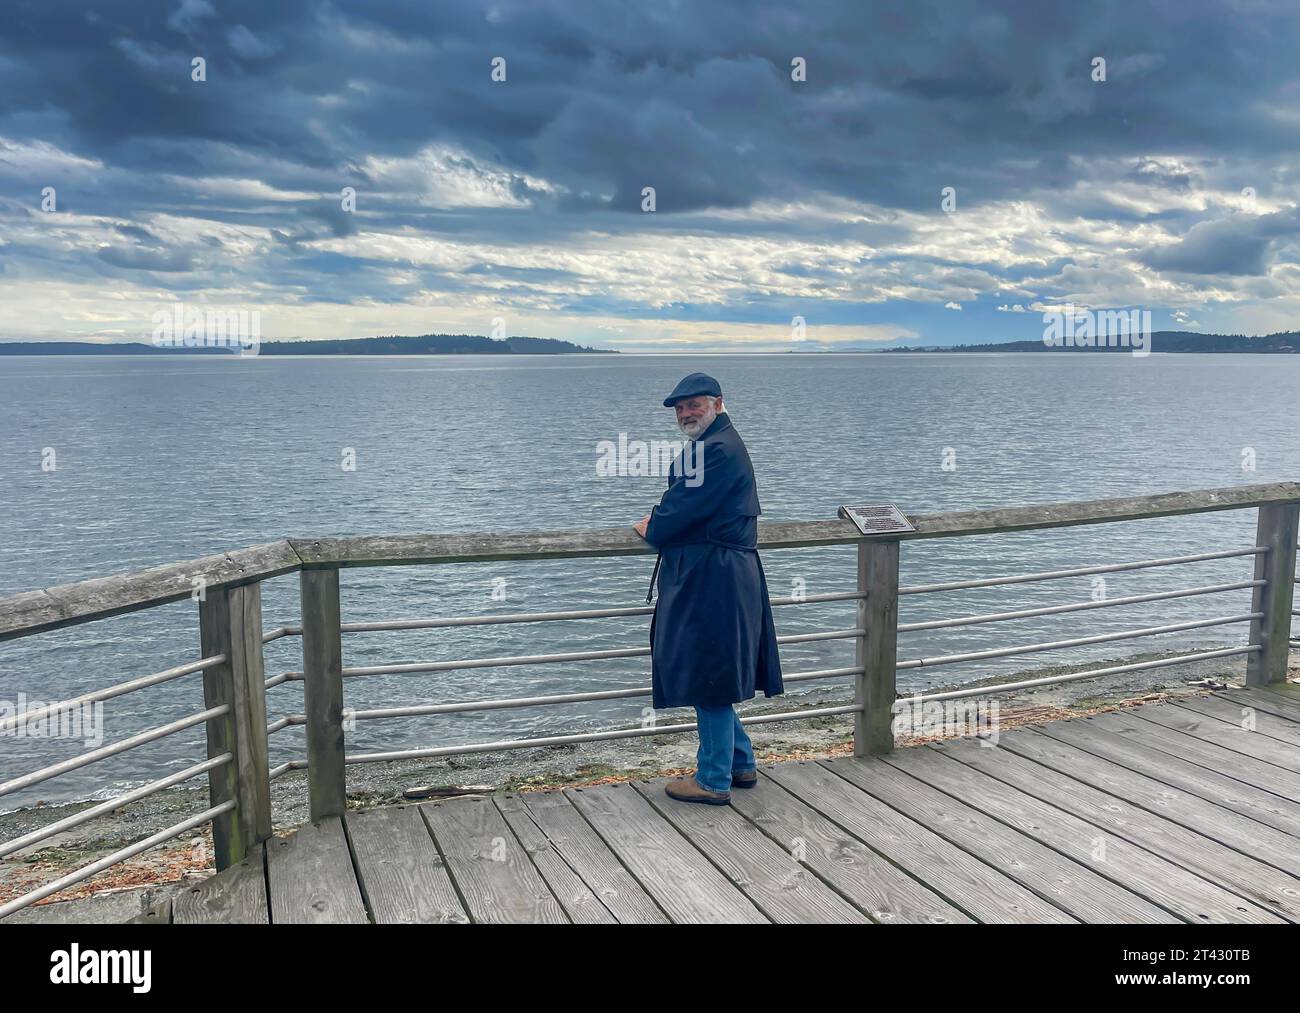 Man standing on a jetty looking out to sea on an overcast day, Sidney, British Columbia, Canada Stock Photo